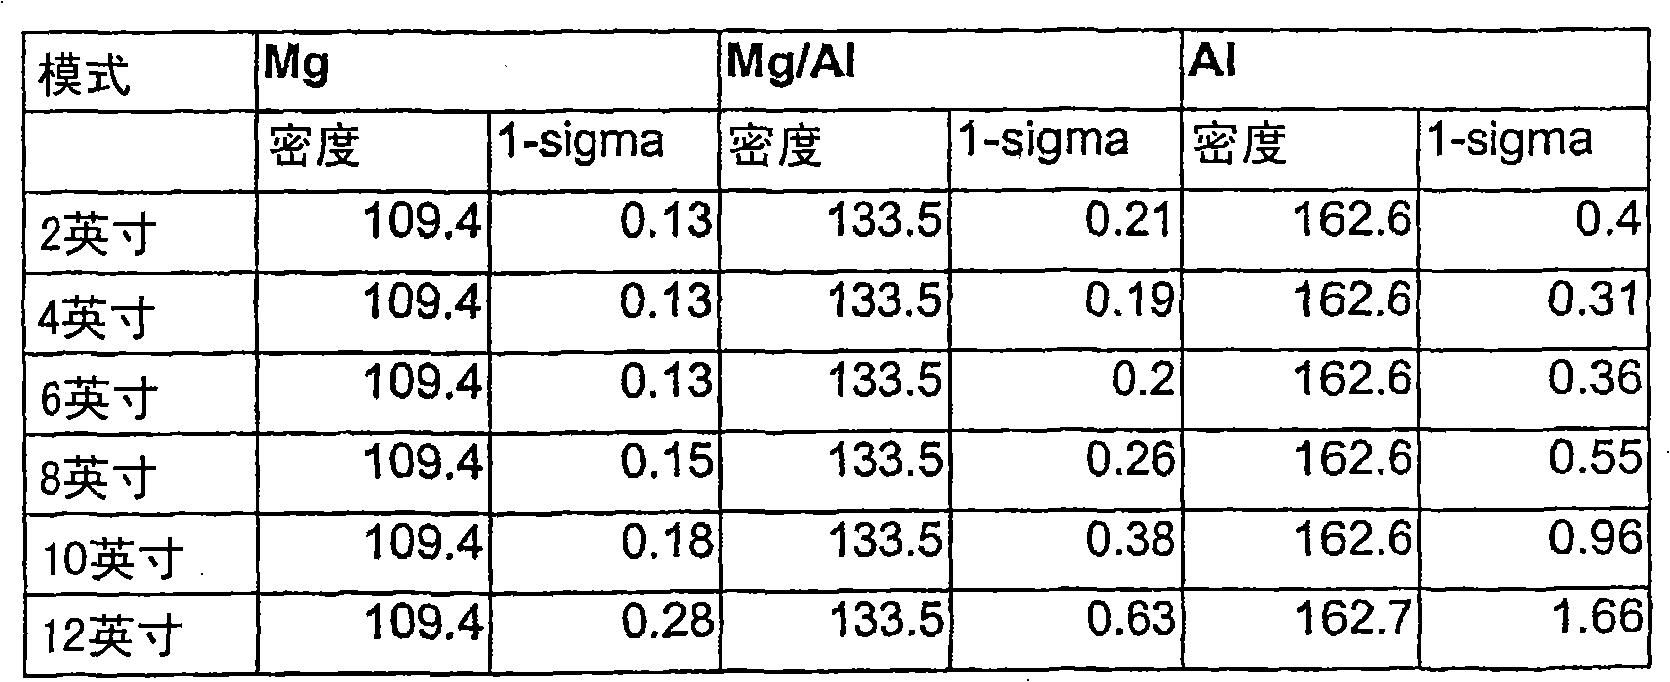 Methods, systems, and computer program products for measuring the density of material